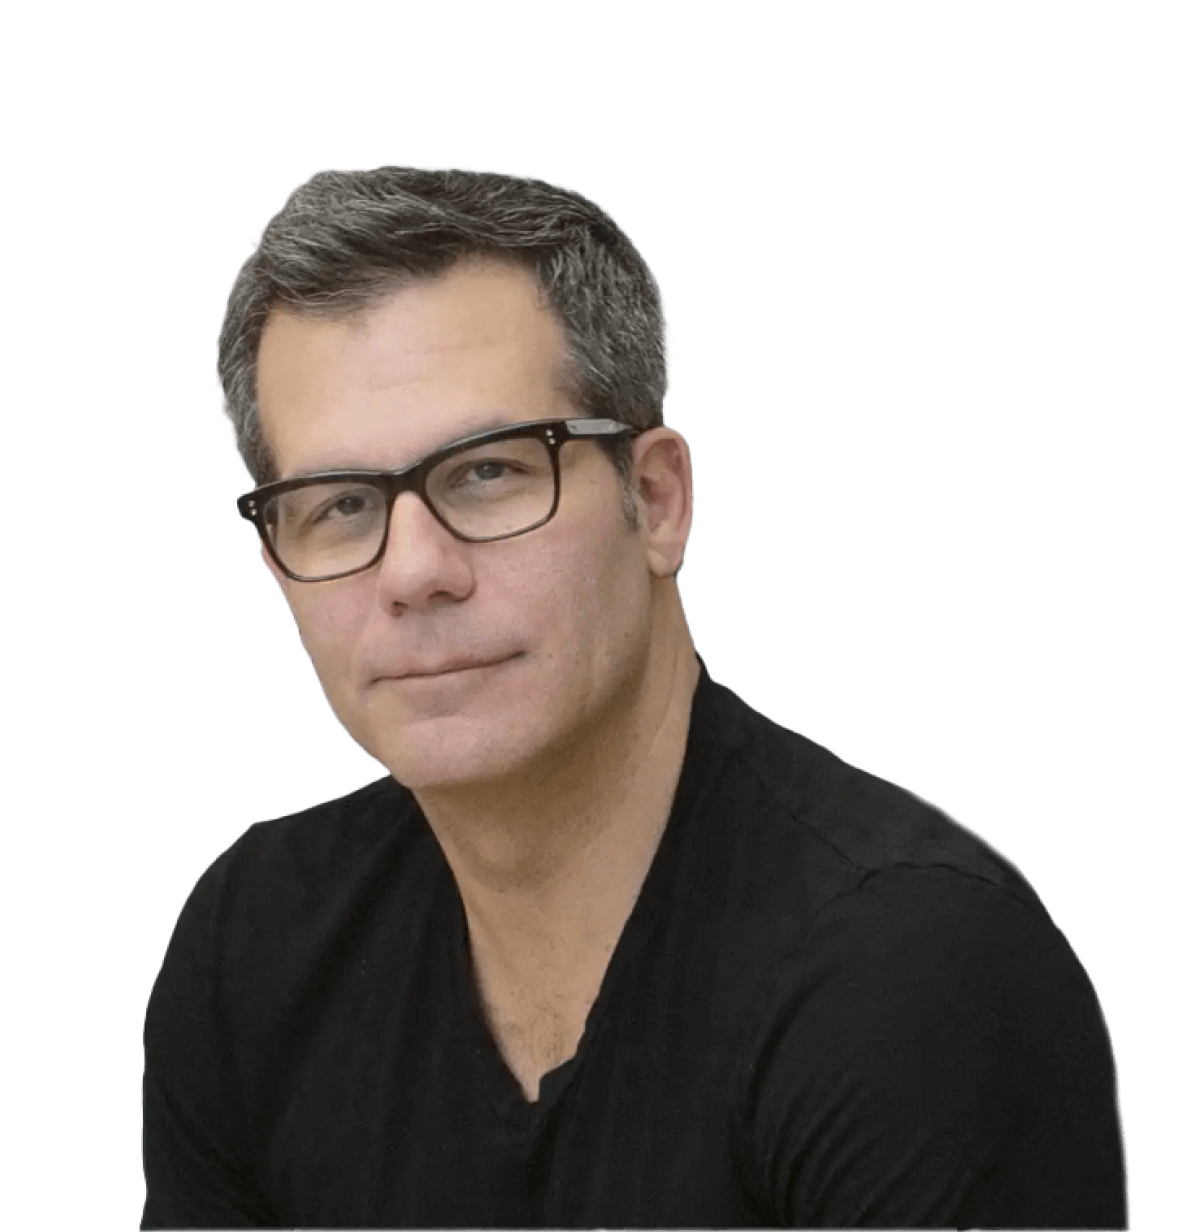 Innovation Lives in Cities, with Richard Florida, World-renowned Economist and Urban Studies Researcher, Author, and Professor